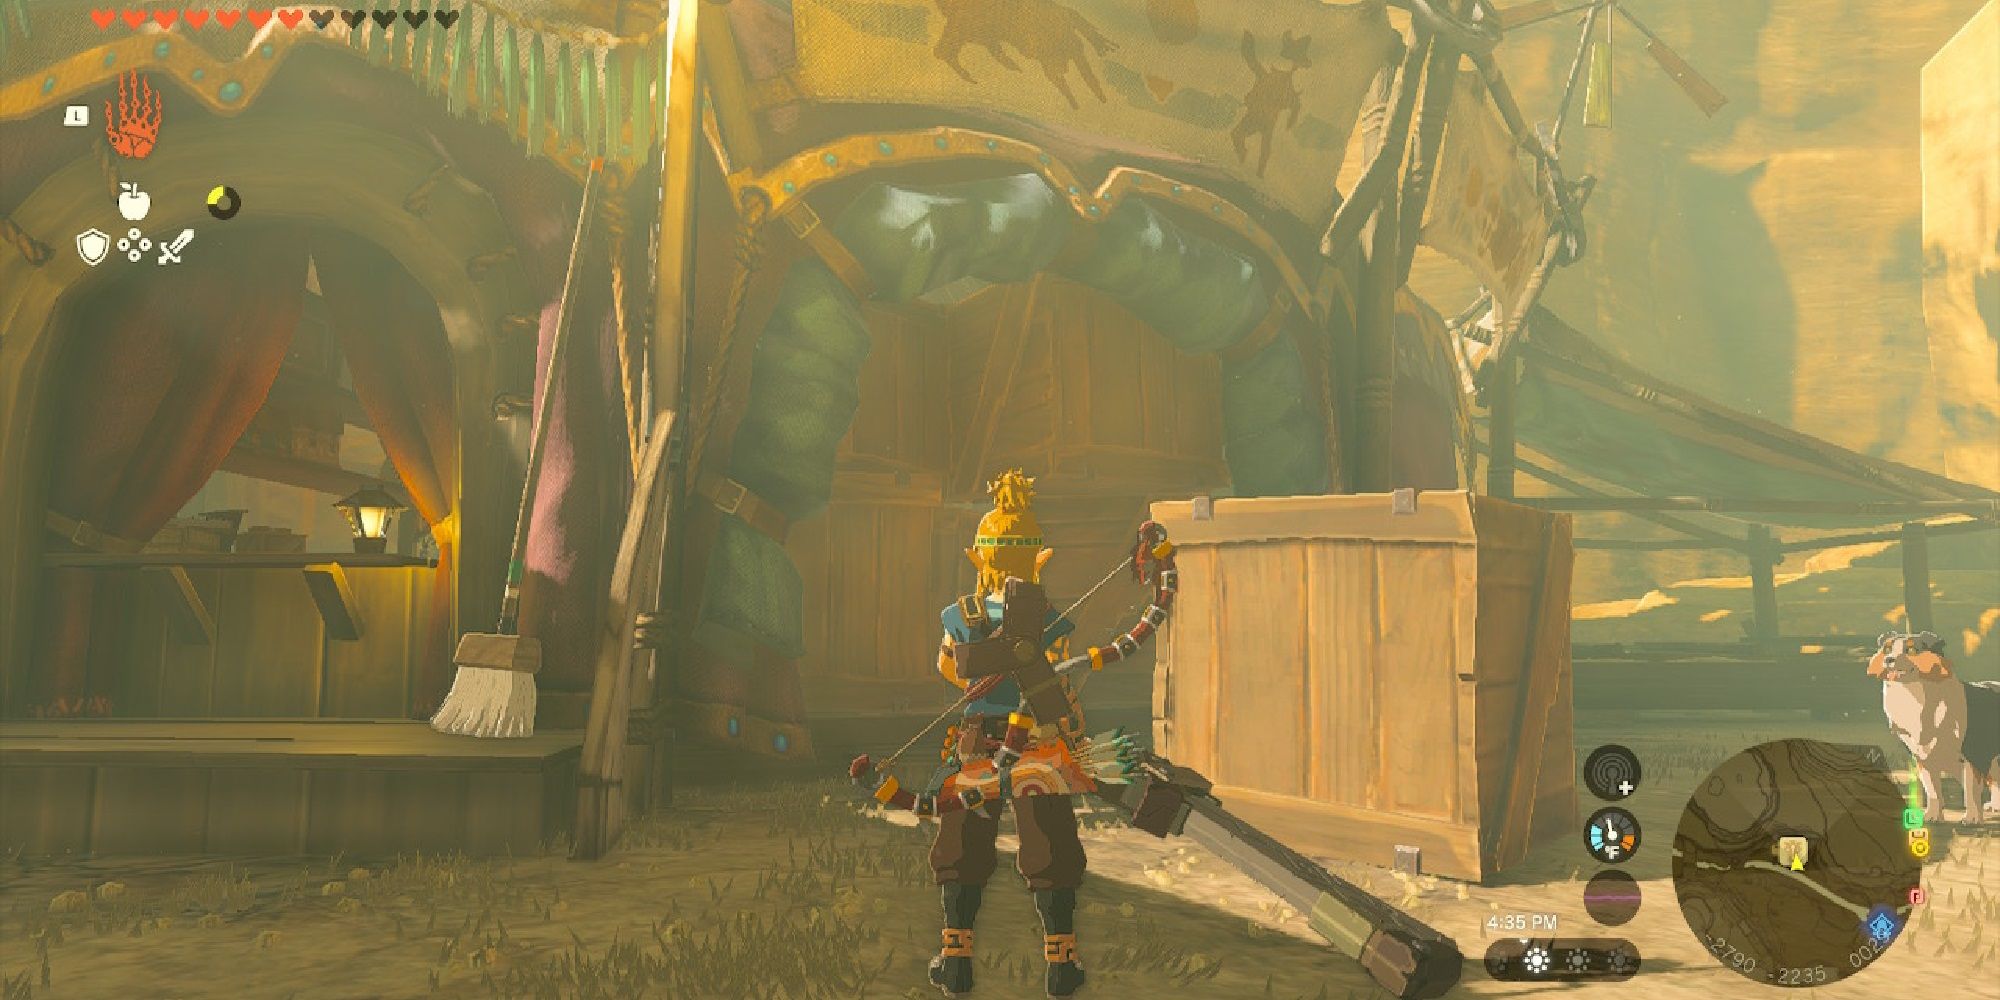 Link stands in front of a stable blocked by wooden boxes